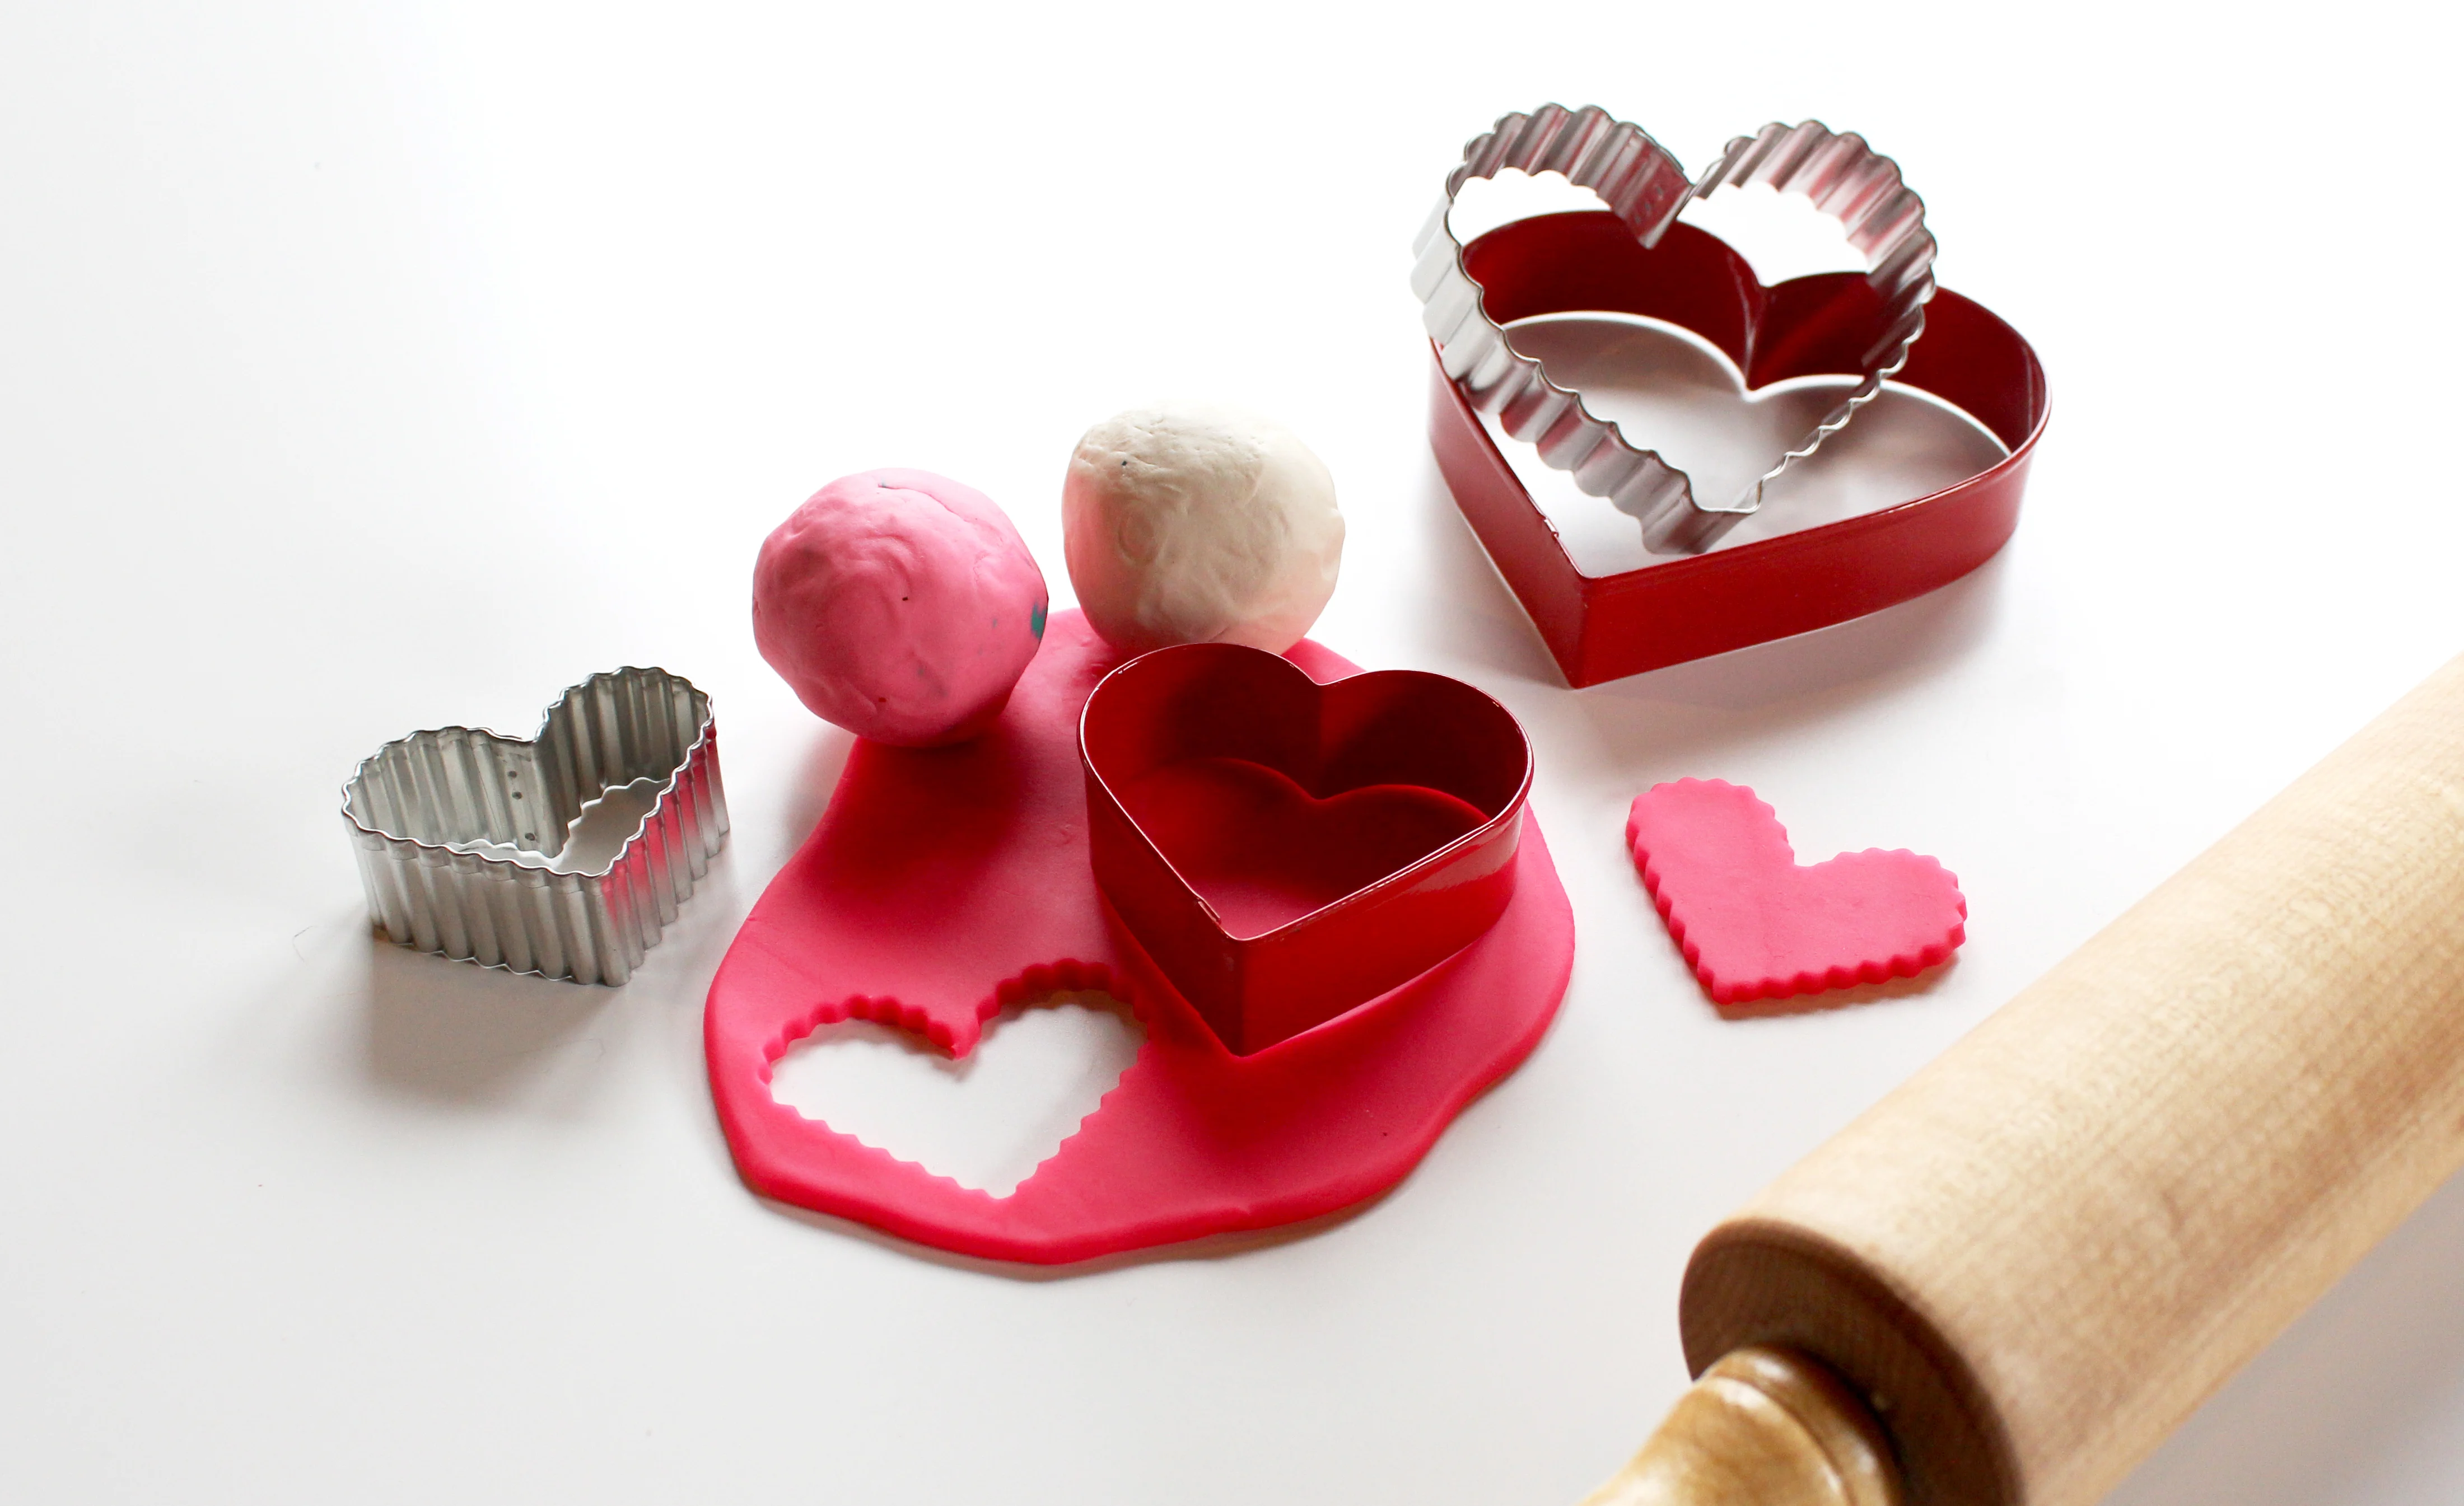 Homemade Playdough for Valentine's Day - Project Nursery